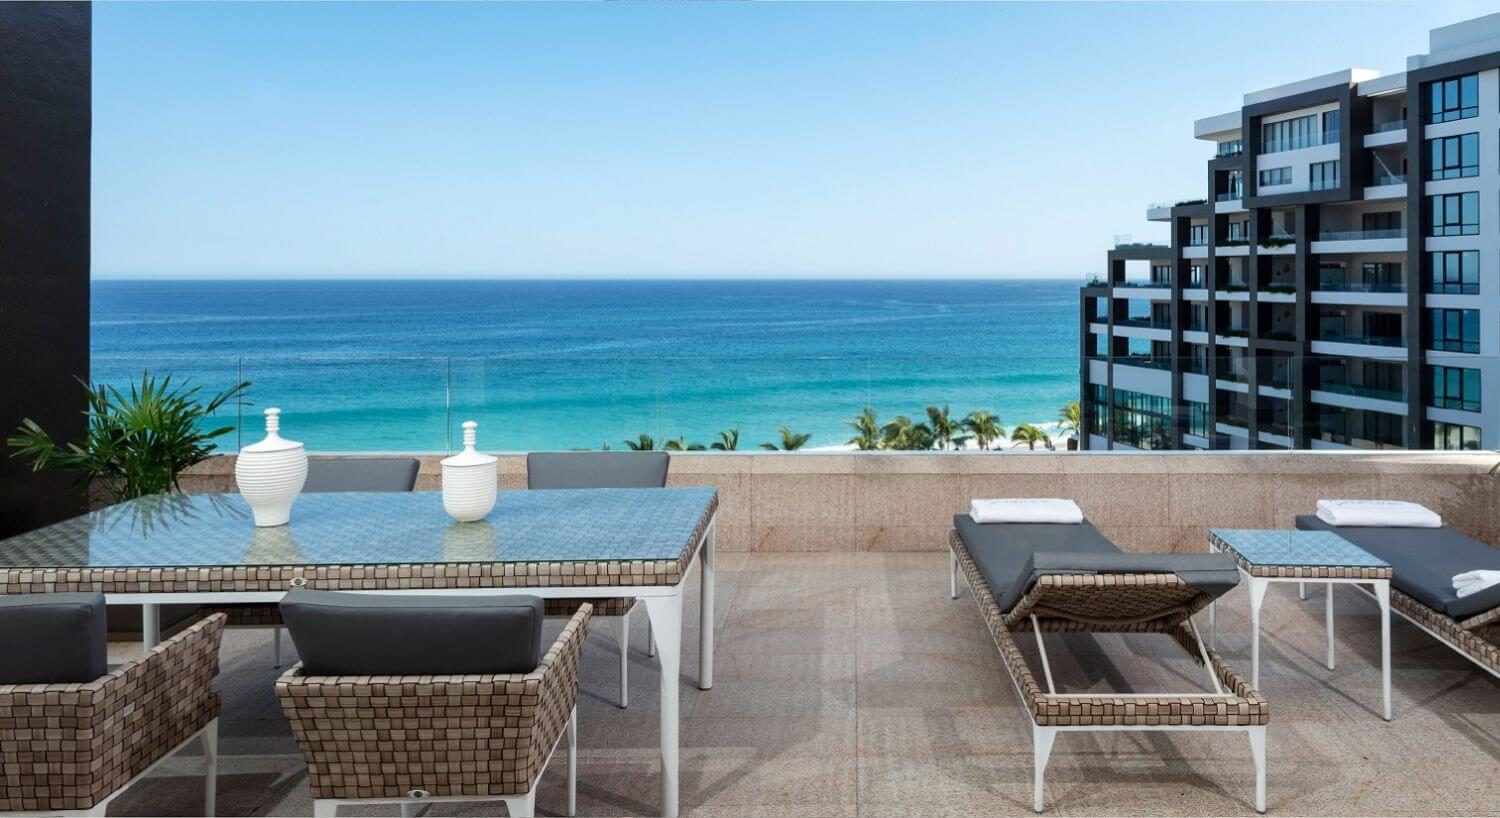 A balcony with outdoor dining table and chairs, lounge chairs, and ocean views.